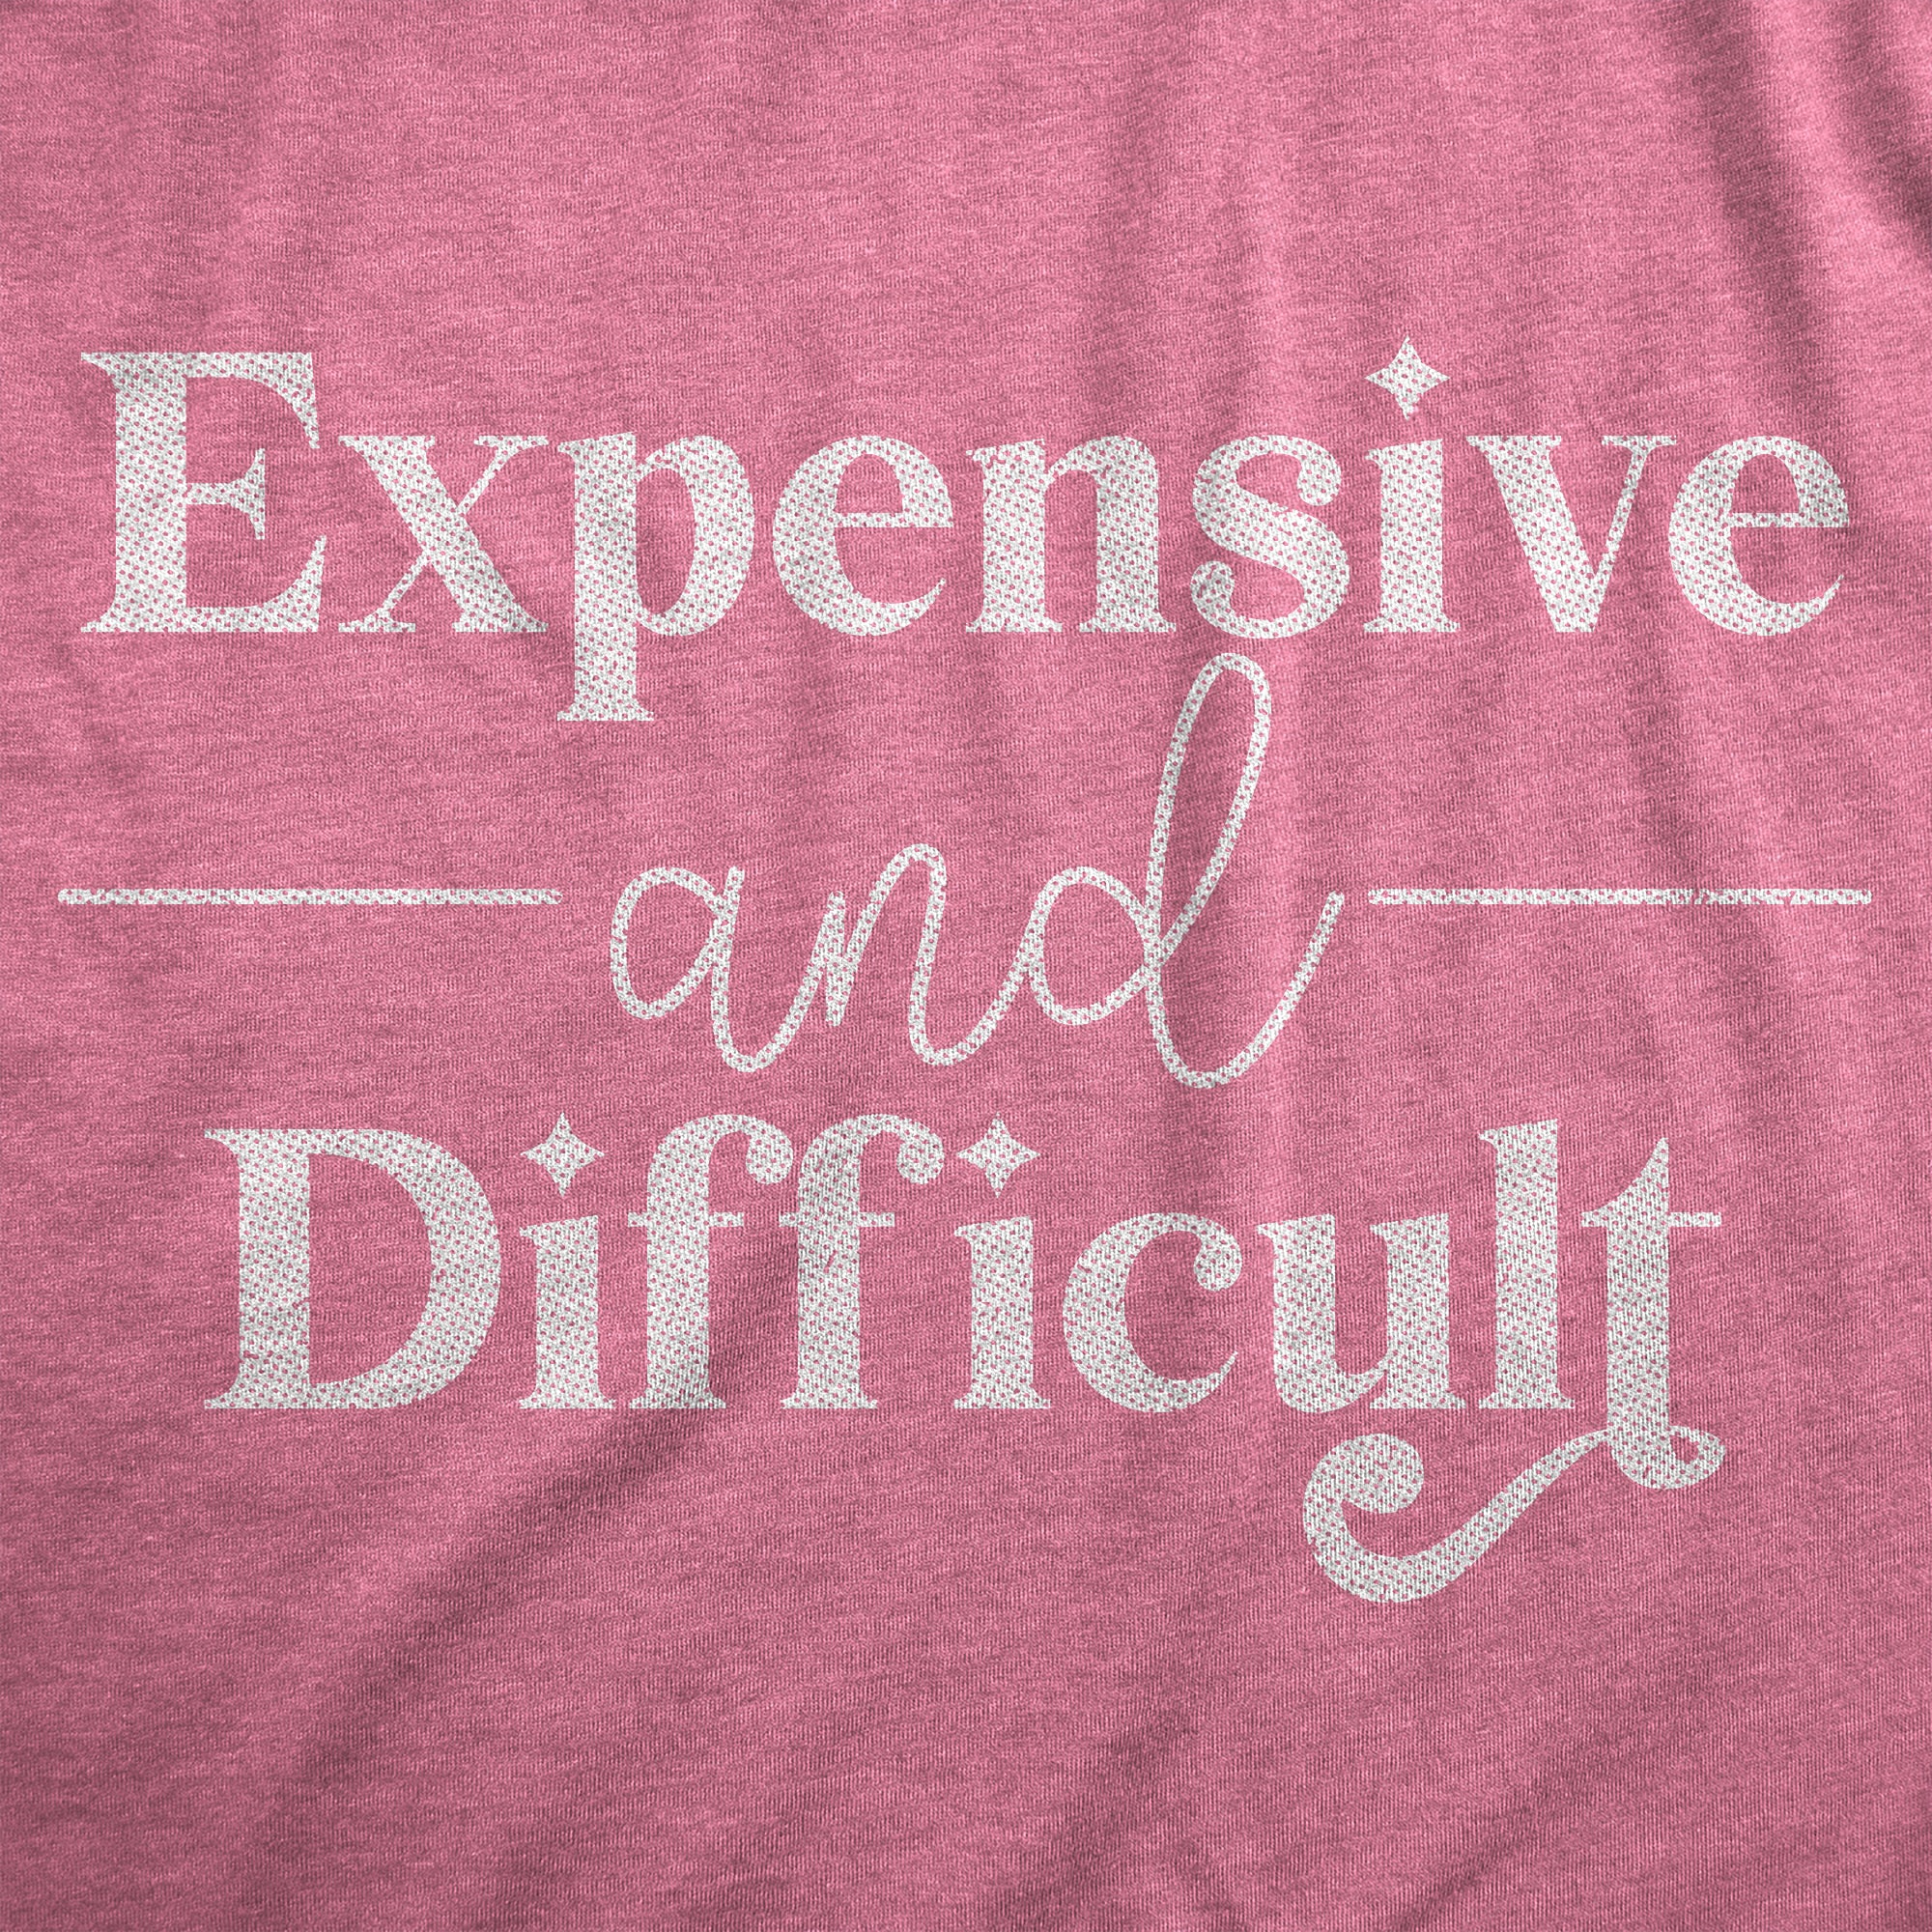 Funny Heather Black - Difficult Expensive And Difficult Womens T Shirt Nerdy Sarcastic Tee